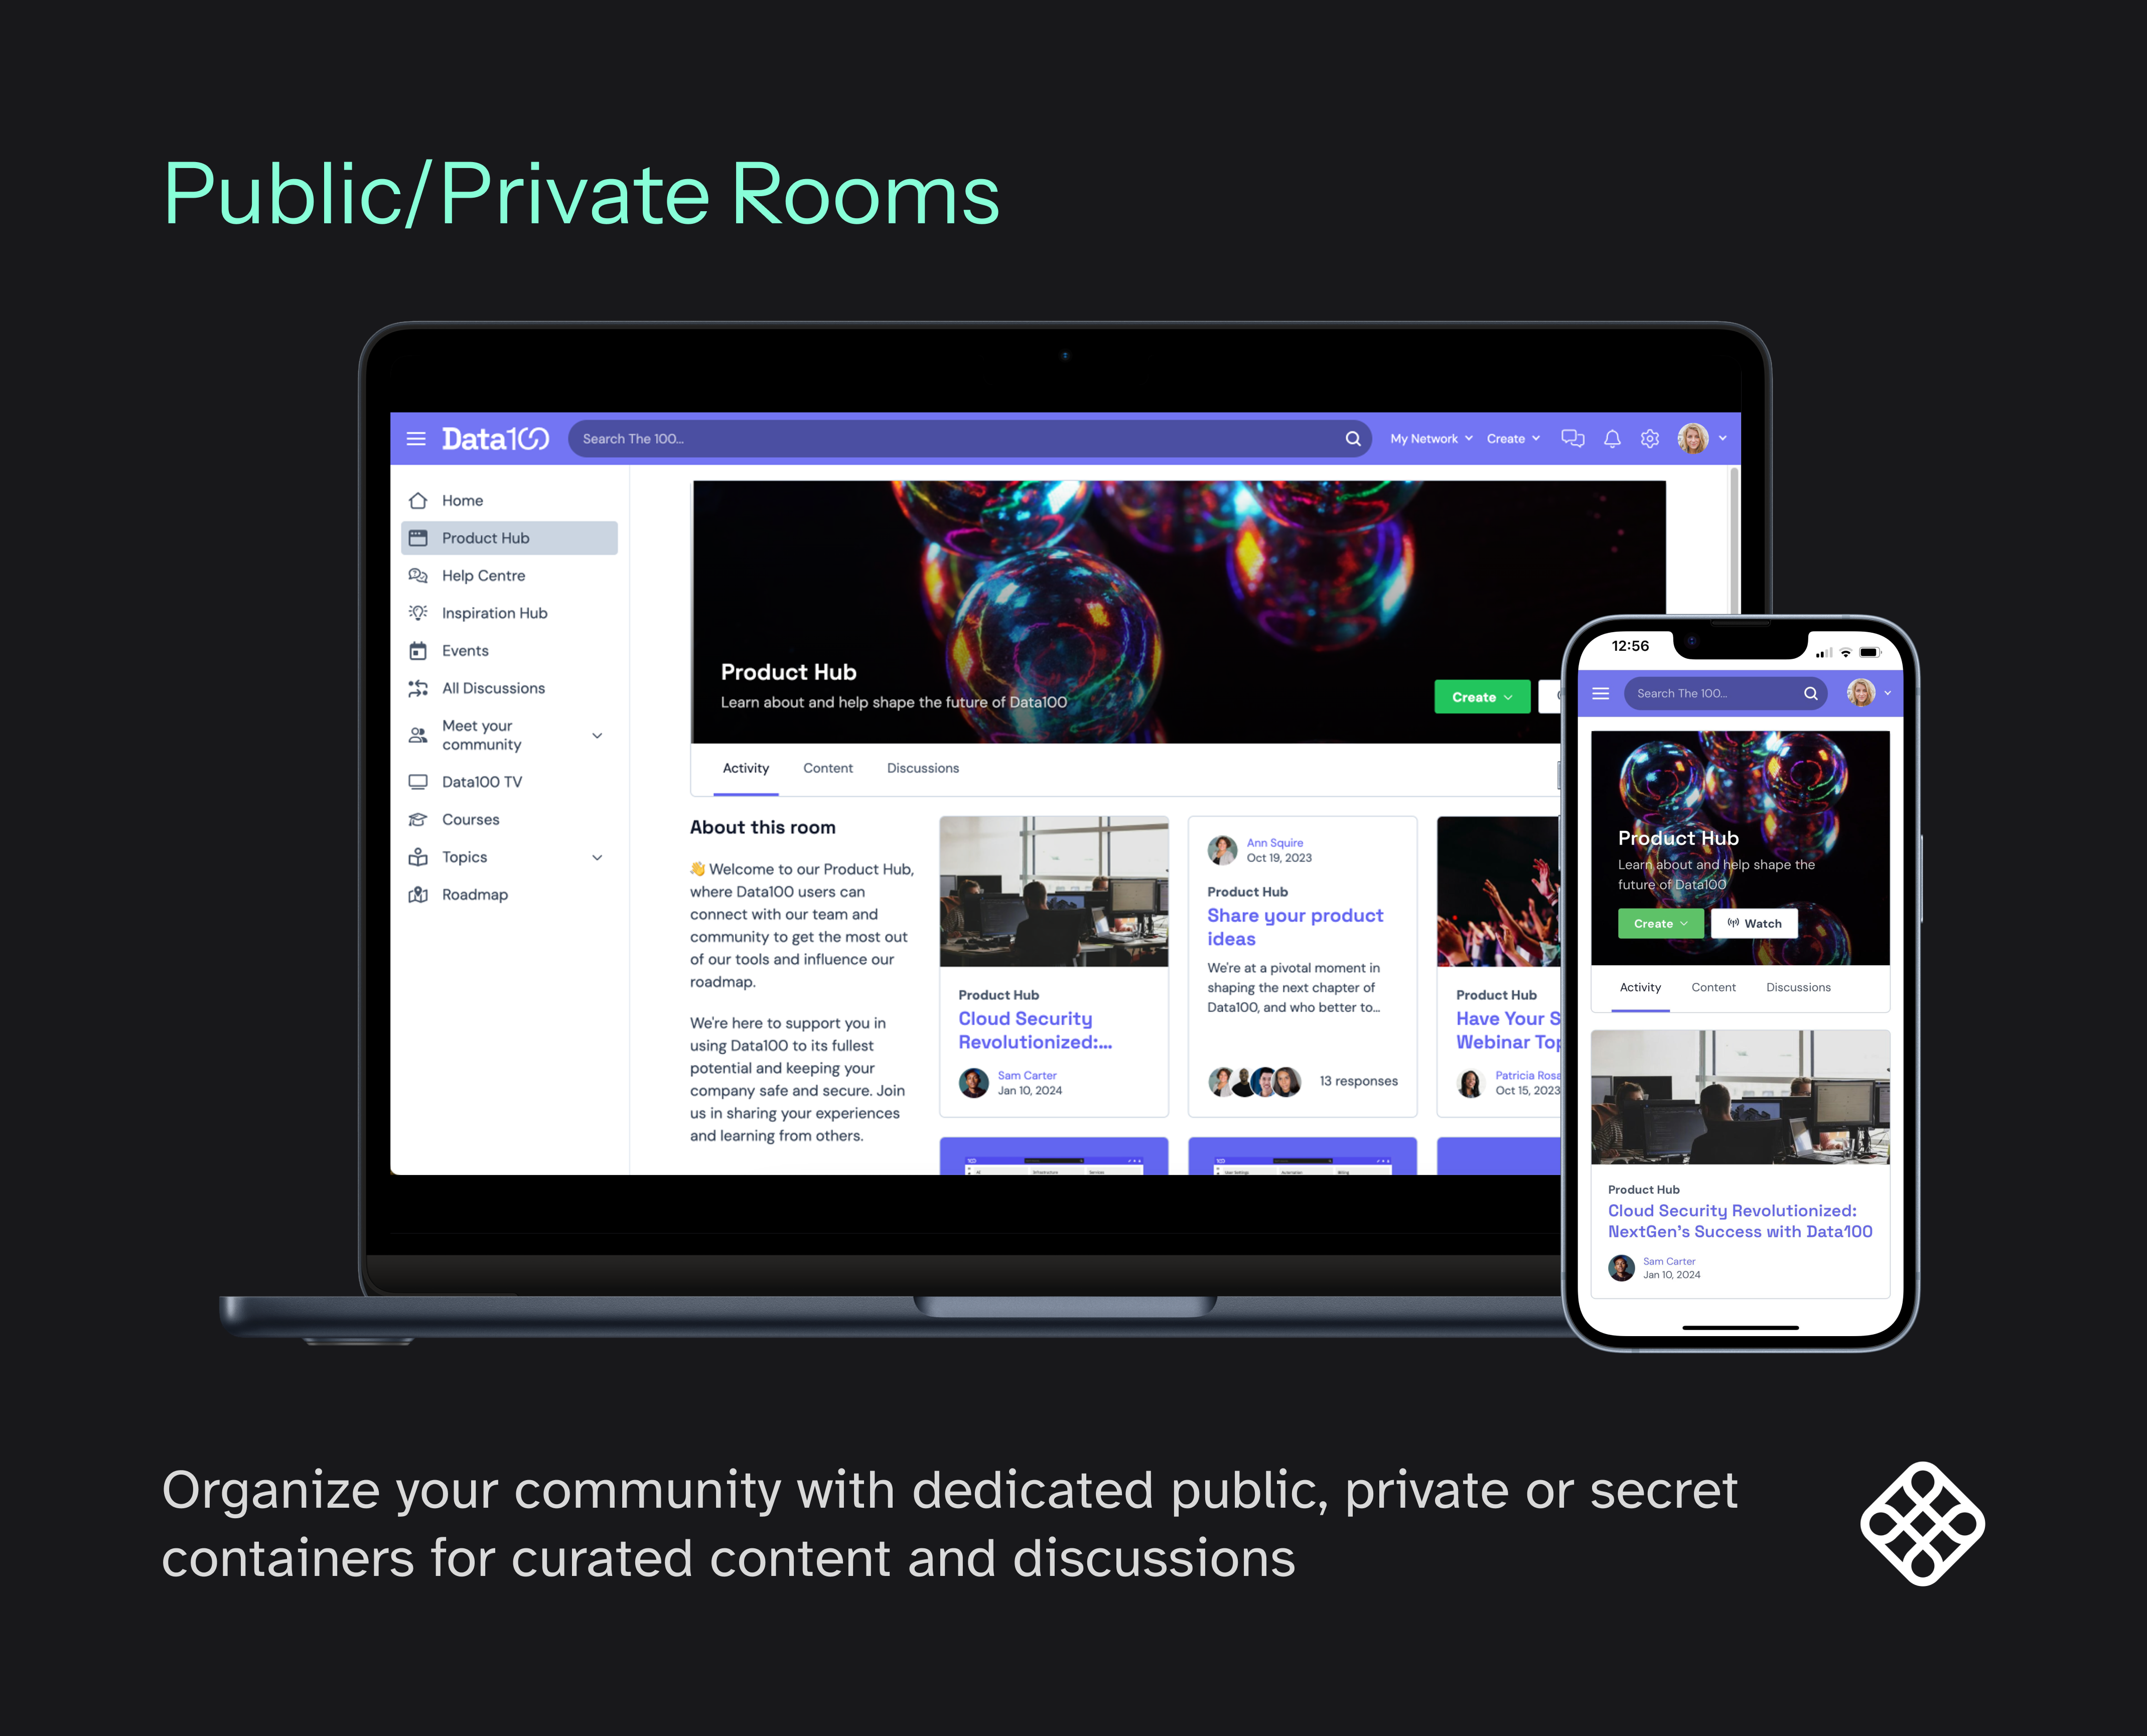 Organize your community with dedicated public, private or secret containers for curated content and discussions